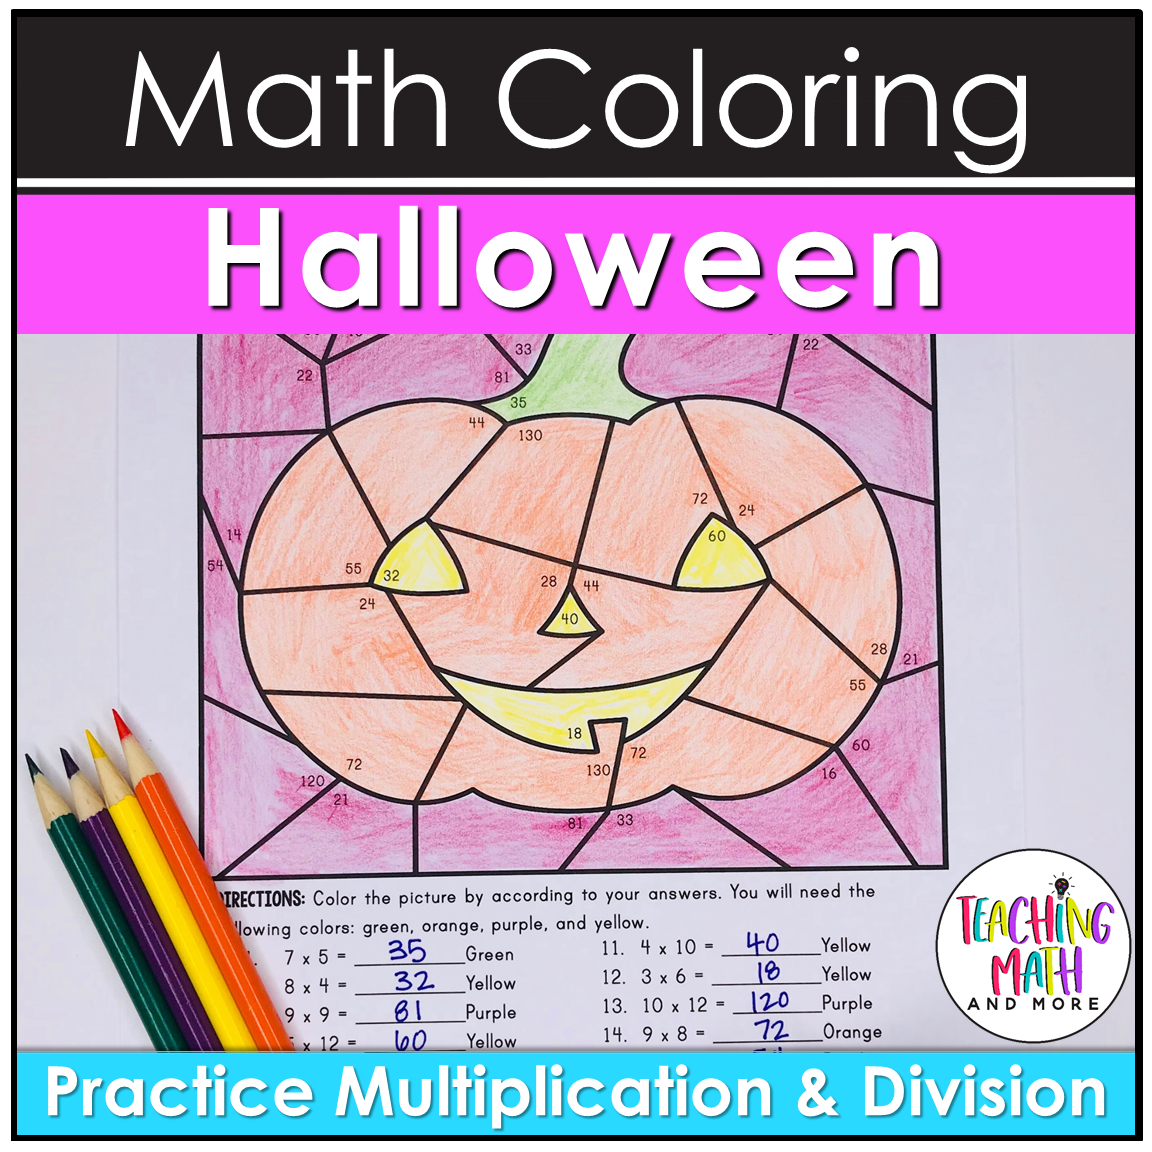 Halloween Math Coloring Multiplication Division Worksheets - Teaching